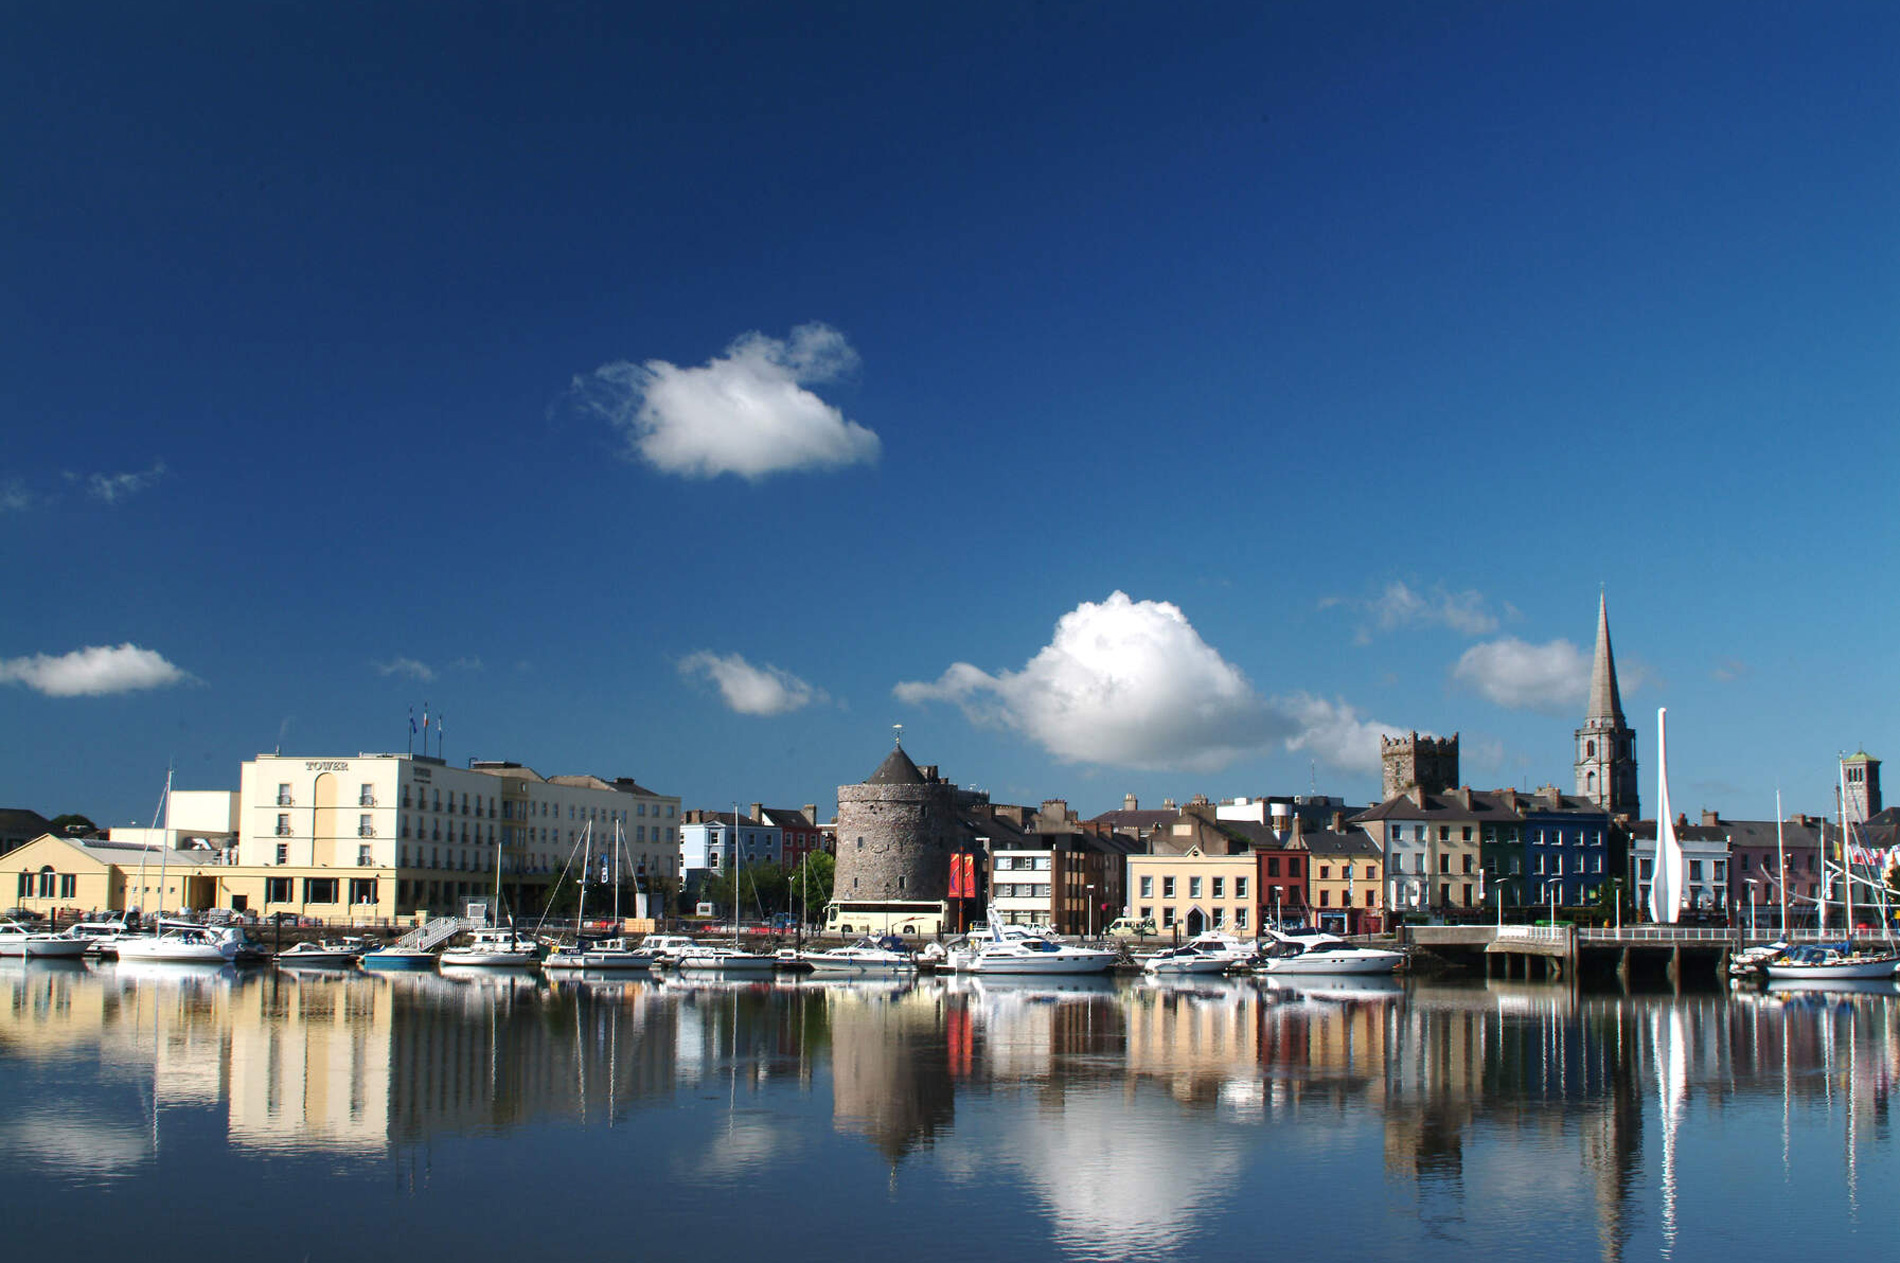 WATERFORD – a continuation of the wild Atlantic way